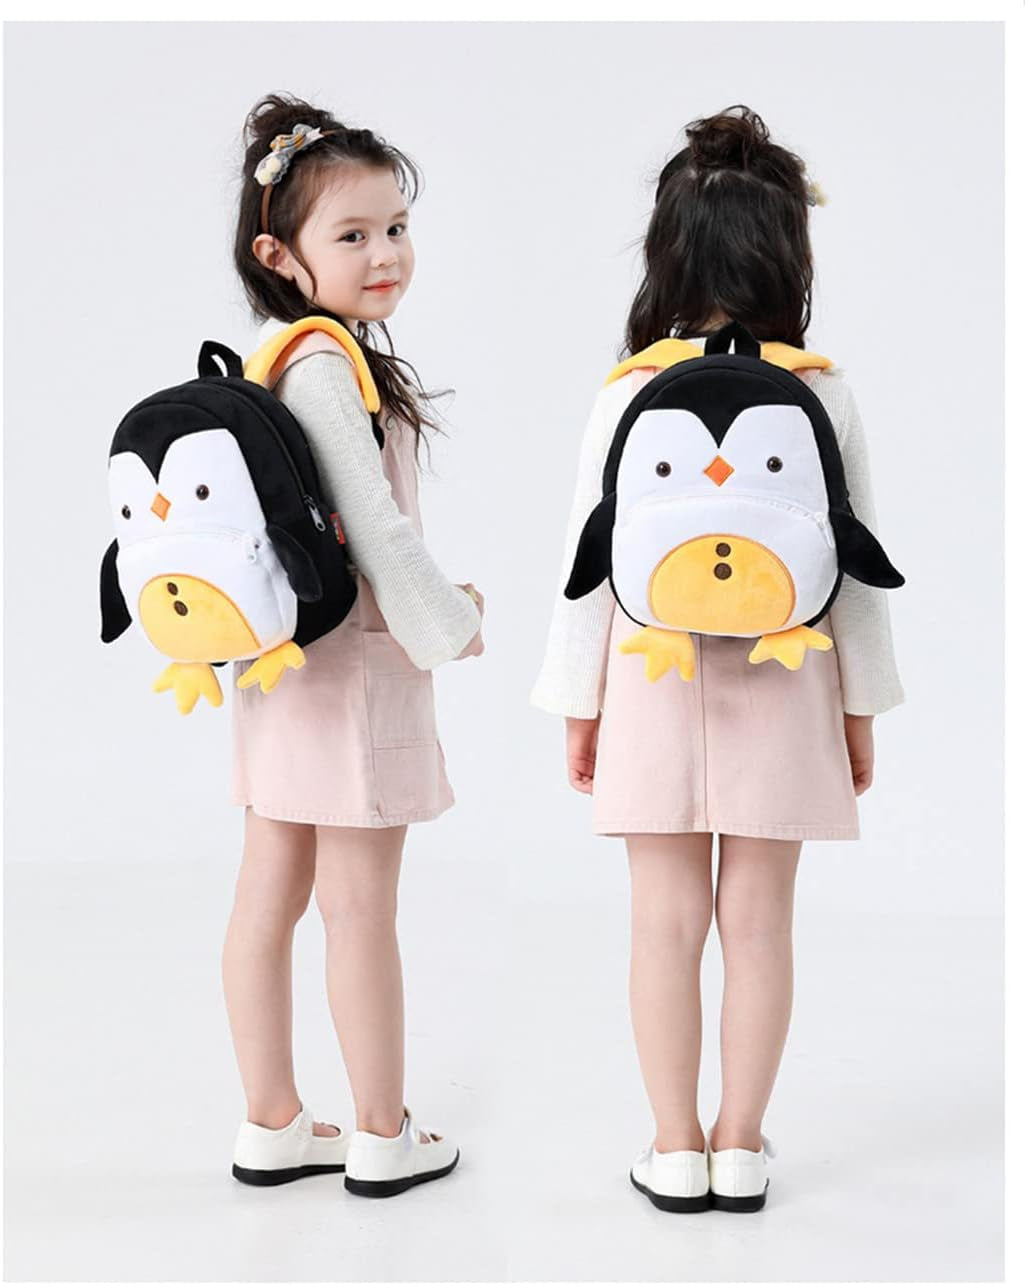 Toddler Backpack for Boys and Girls, Cute Soft Plush Animal Cartoon Mini Backpack Little for Kids 2-6 Years (Avocado)